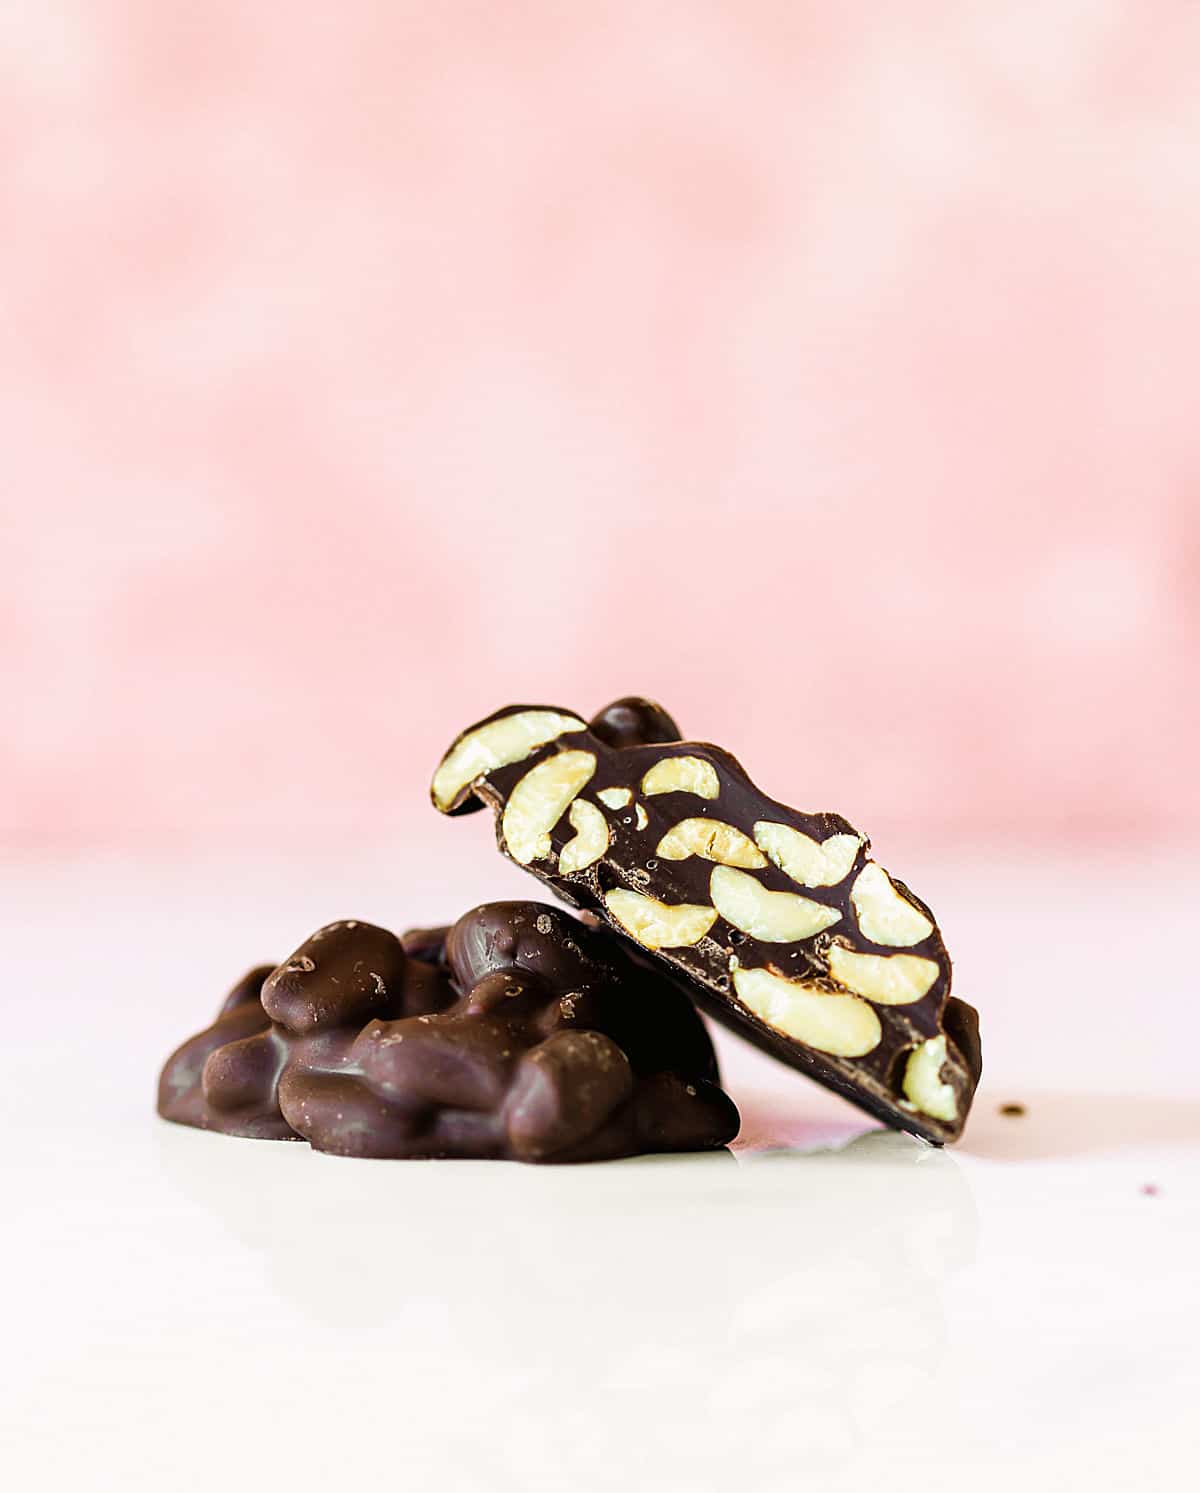 Cut and whole chocolate peanut clusters on white and pink background